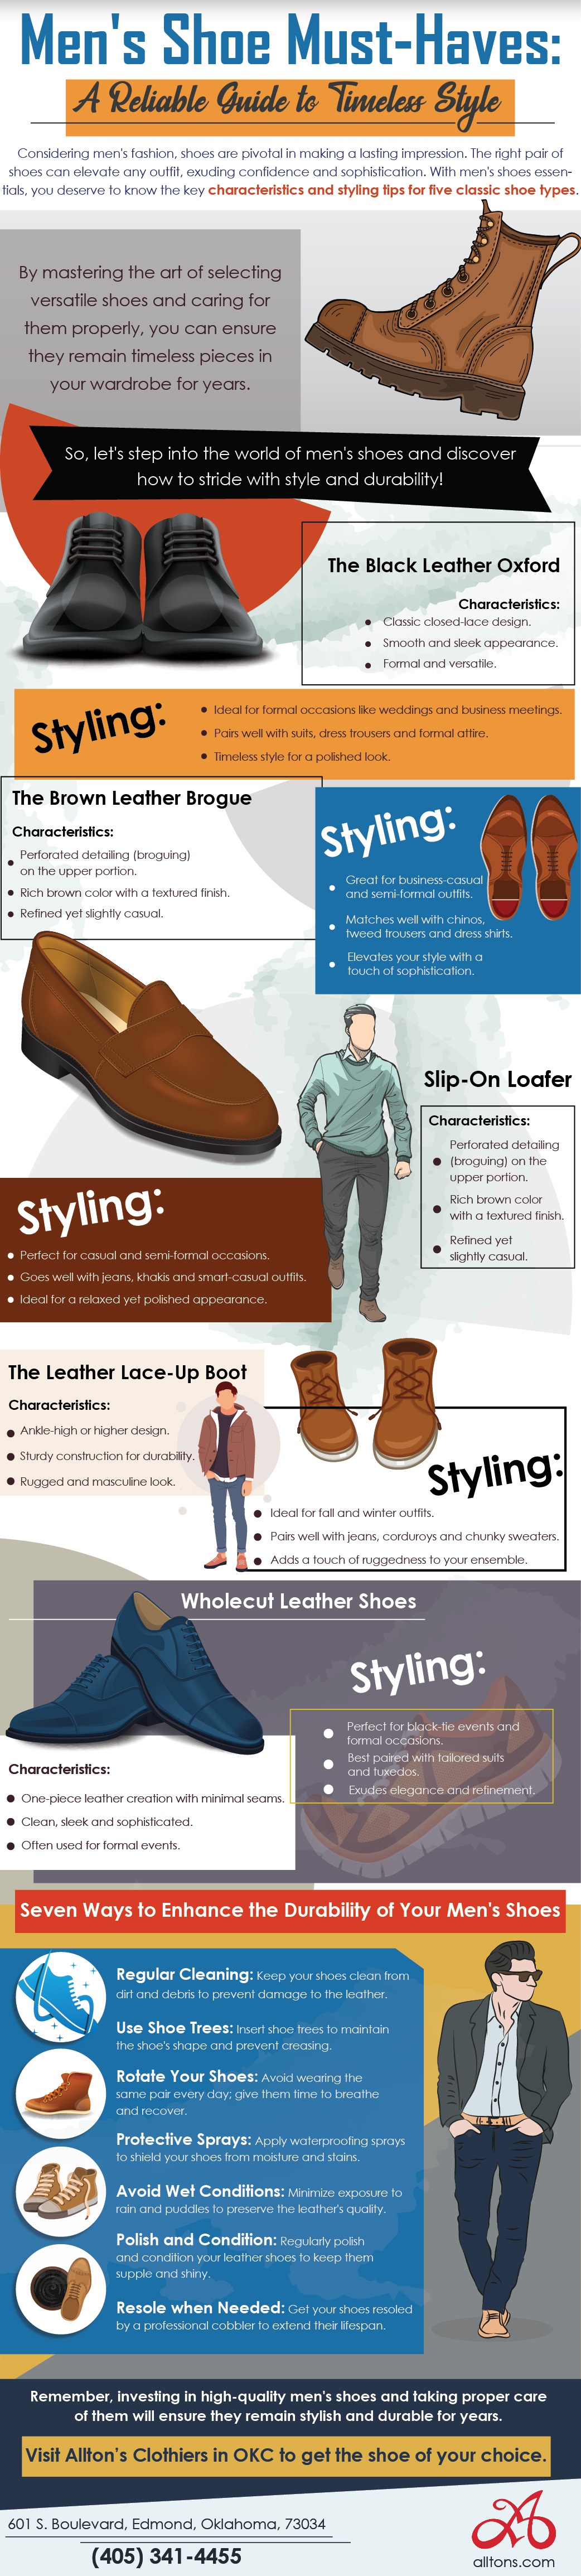 Men's Shoe Must-Haves A Reliable Guide to Timeless Style